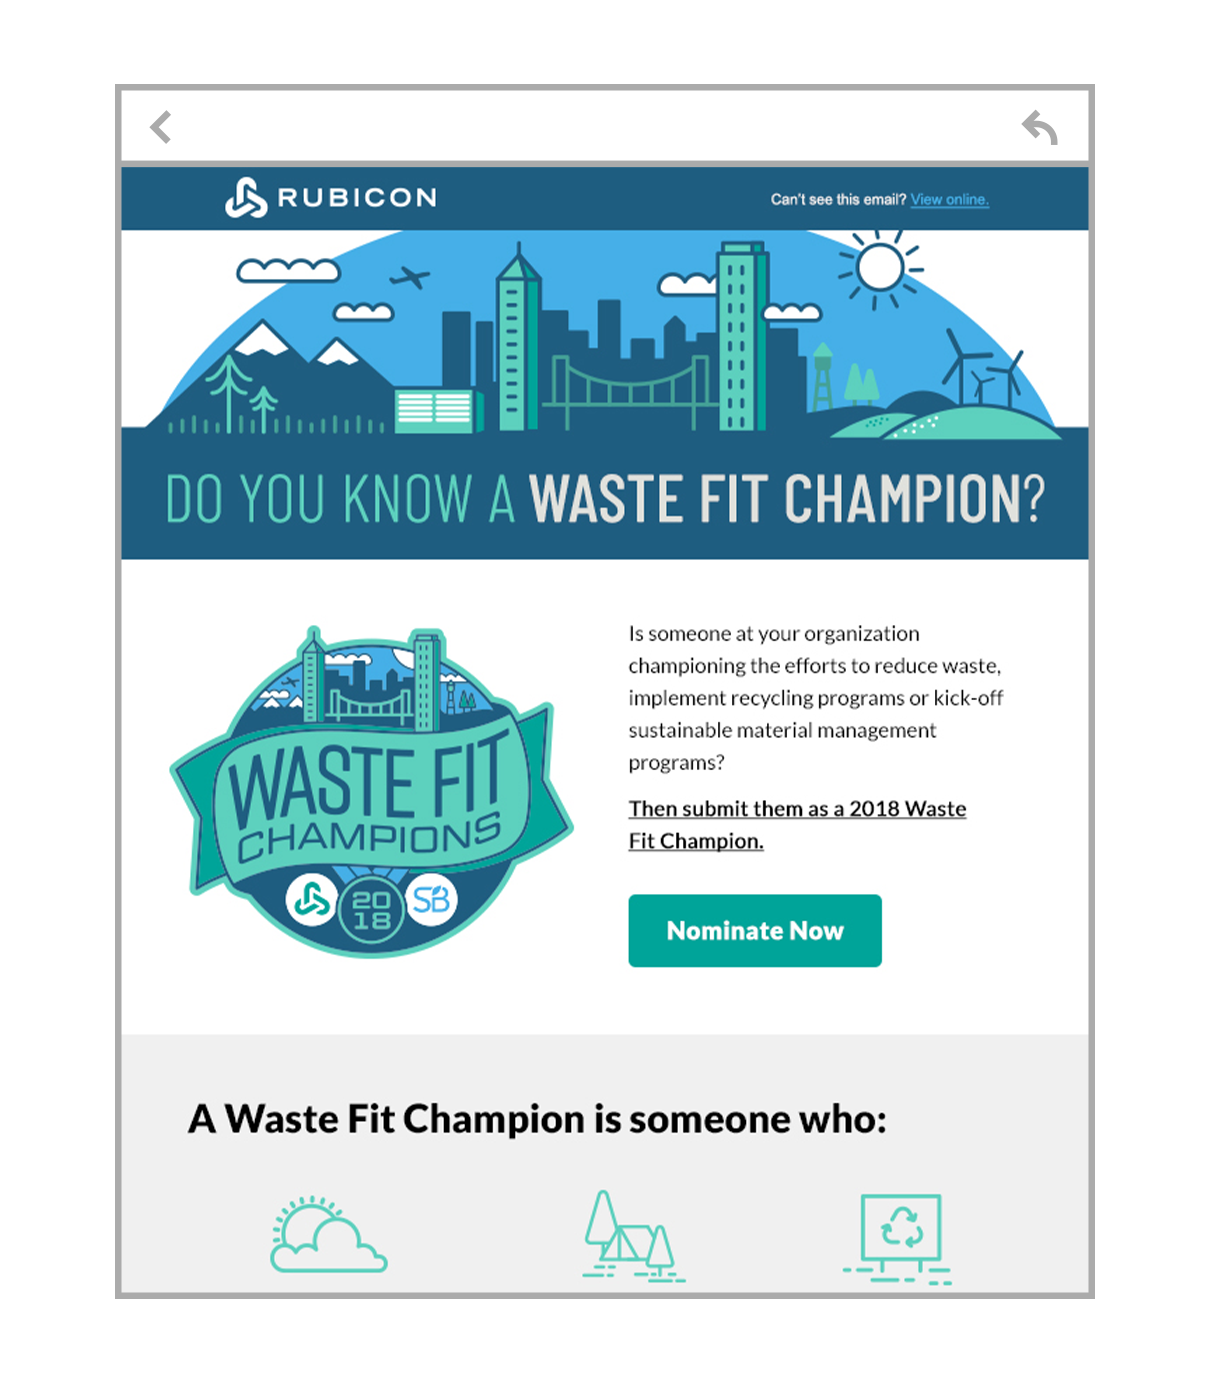 Do you know a Waste Fit Champion email campaign design